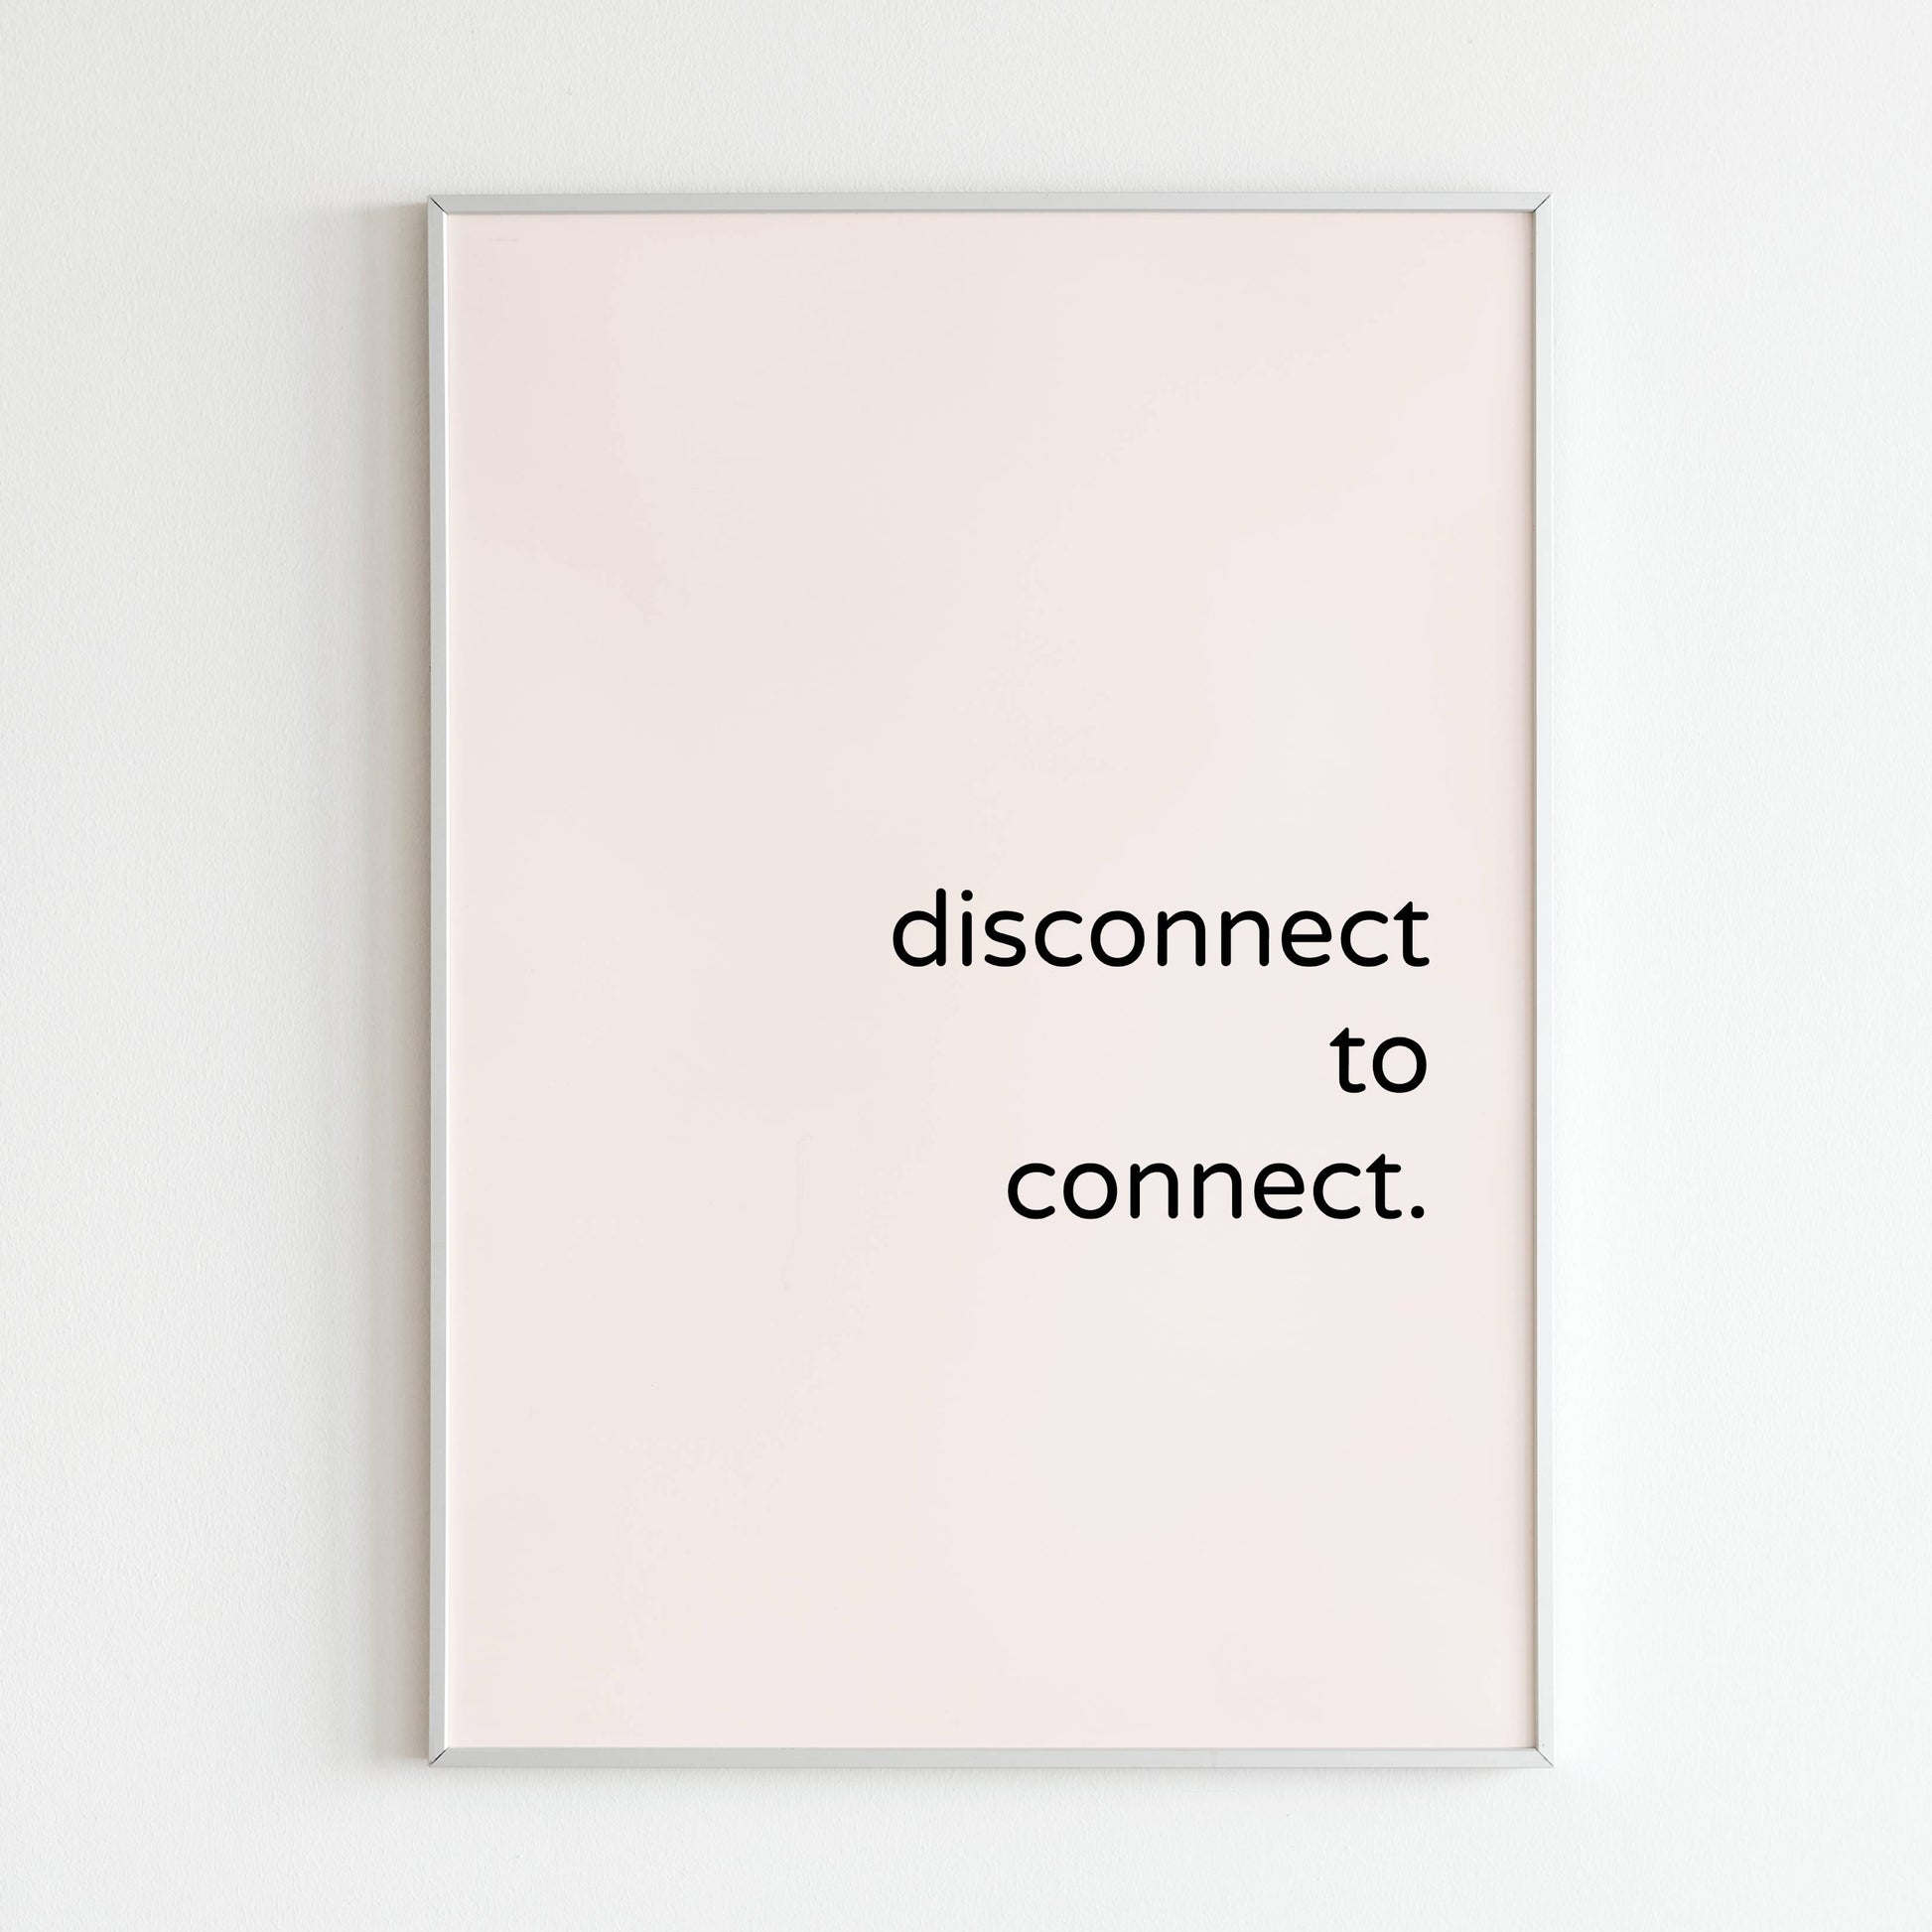 Downloadable "Disconnect to connect" art print, promote deeper connections by taking a break from technology.